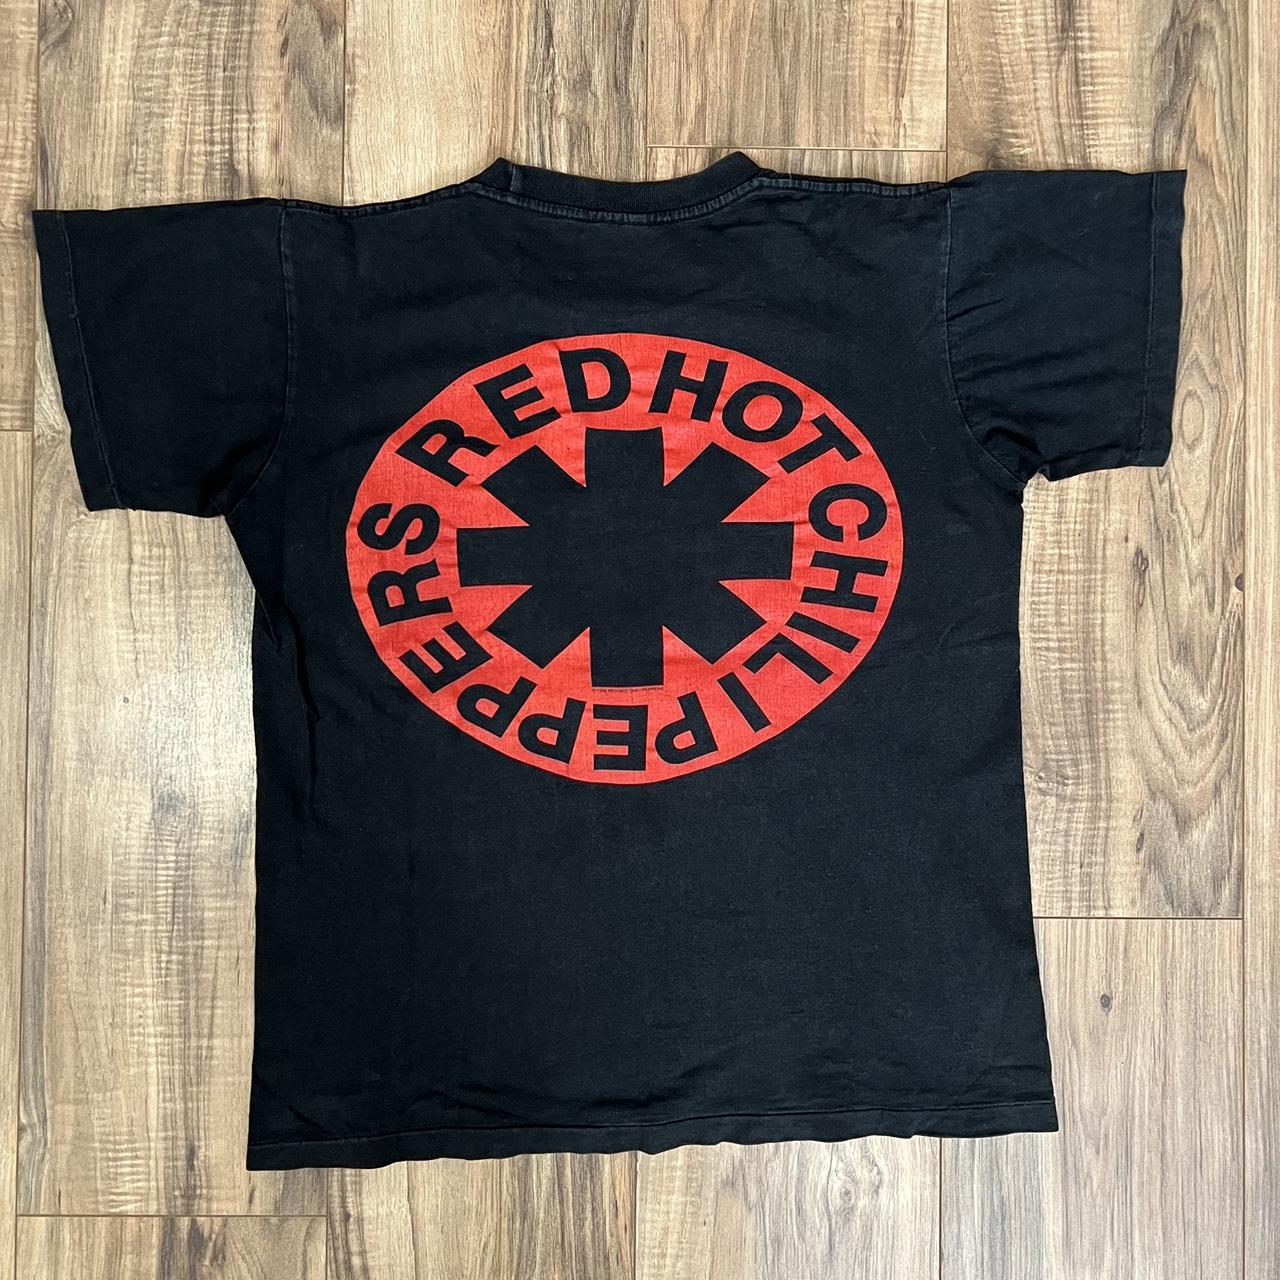 Red Hot Chili Peppers Sperm Vintage Shirt - Size US - Depop